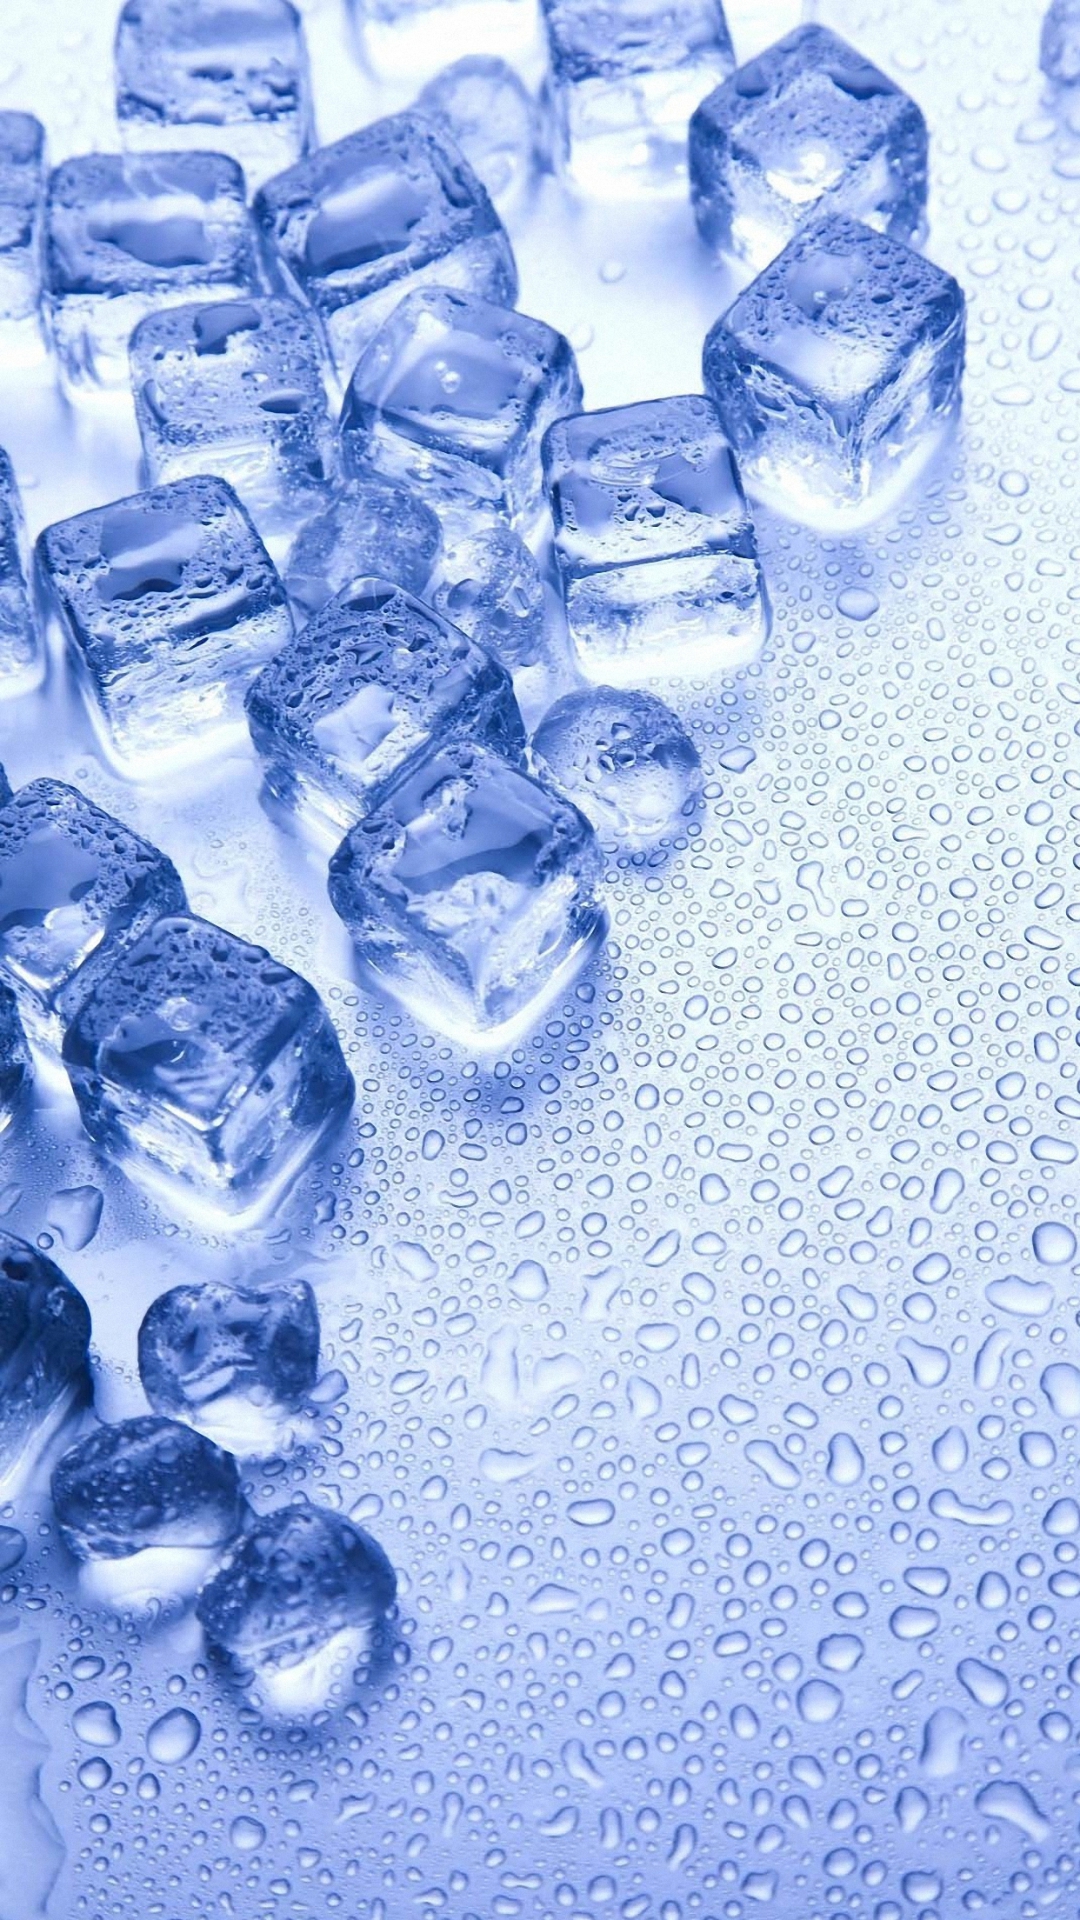 Cute Ice Cubes Iphone 6 Wallpapers Hd - Ice Cubes Wallpaper Iphone - HD Wallpaper 